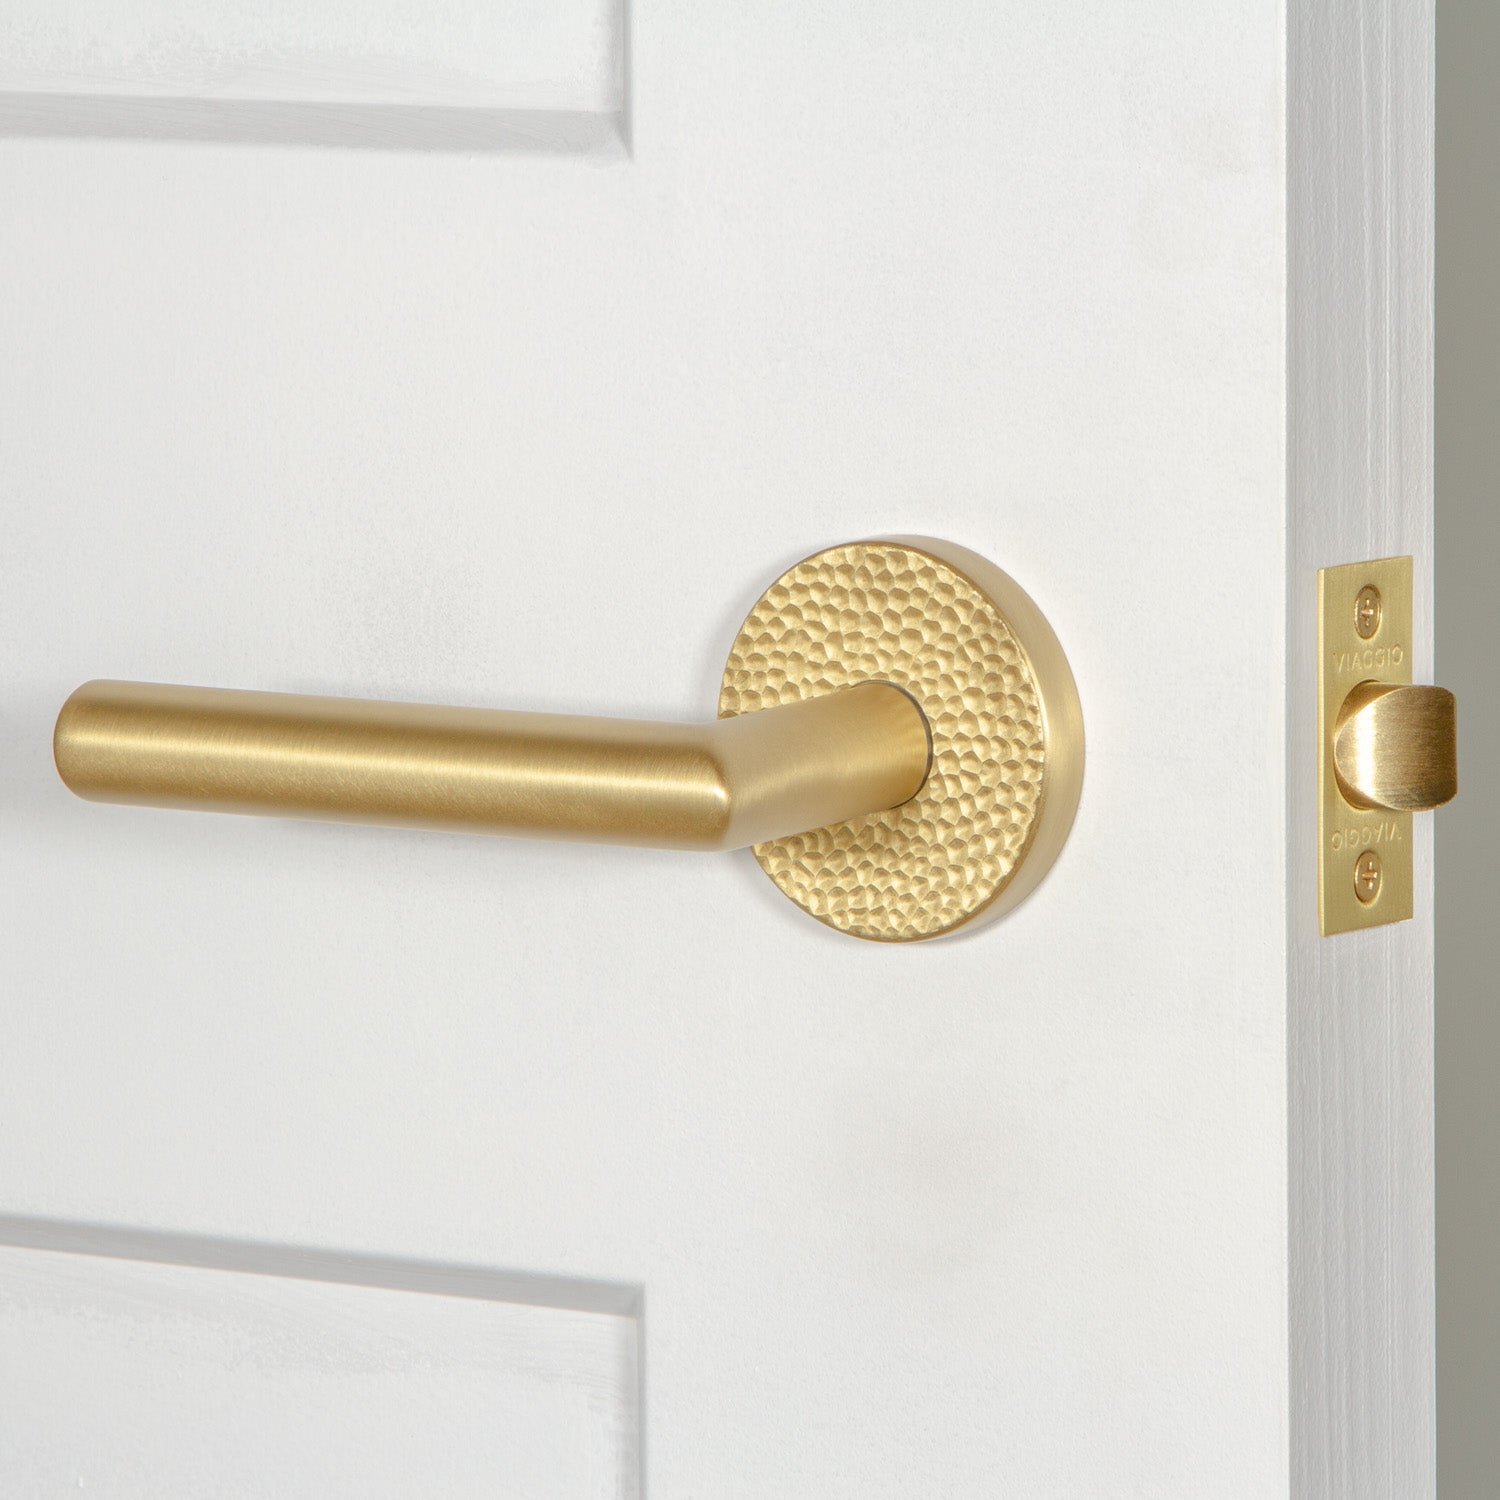 Your Questions Answered About Satin Brass - Viaggio Hardware